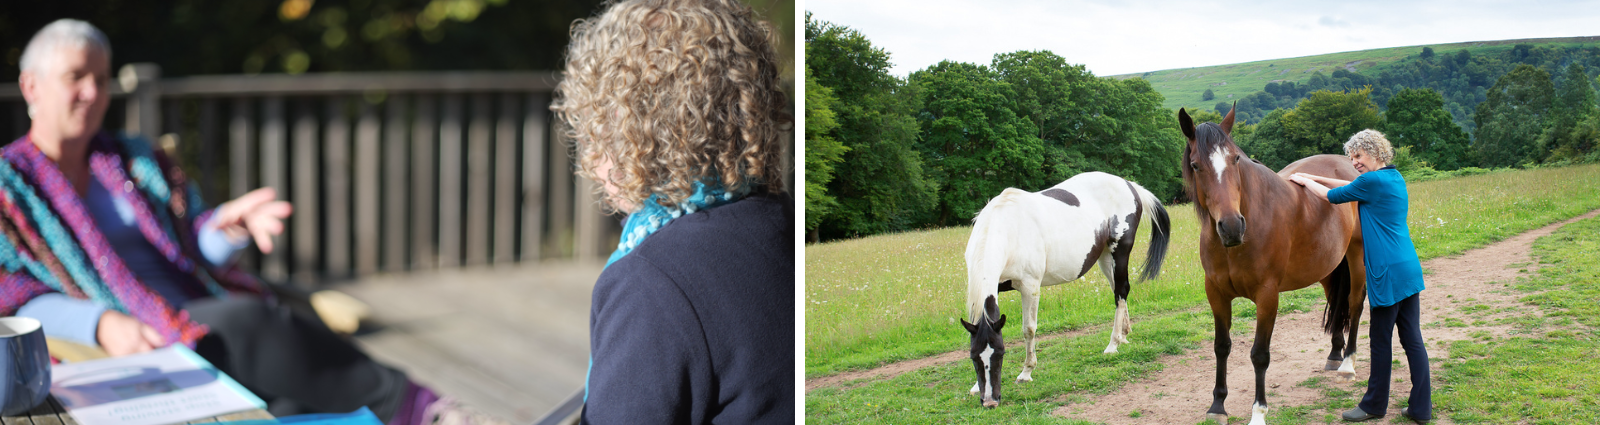 banner of 2 images - one shows Robyn Harris working with a woman at a wooden table on some wooden decking; the other shows Robyn massaging the back of one of the Equenergy horses while the other grazes next to them